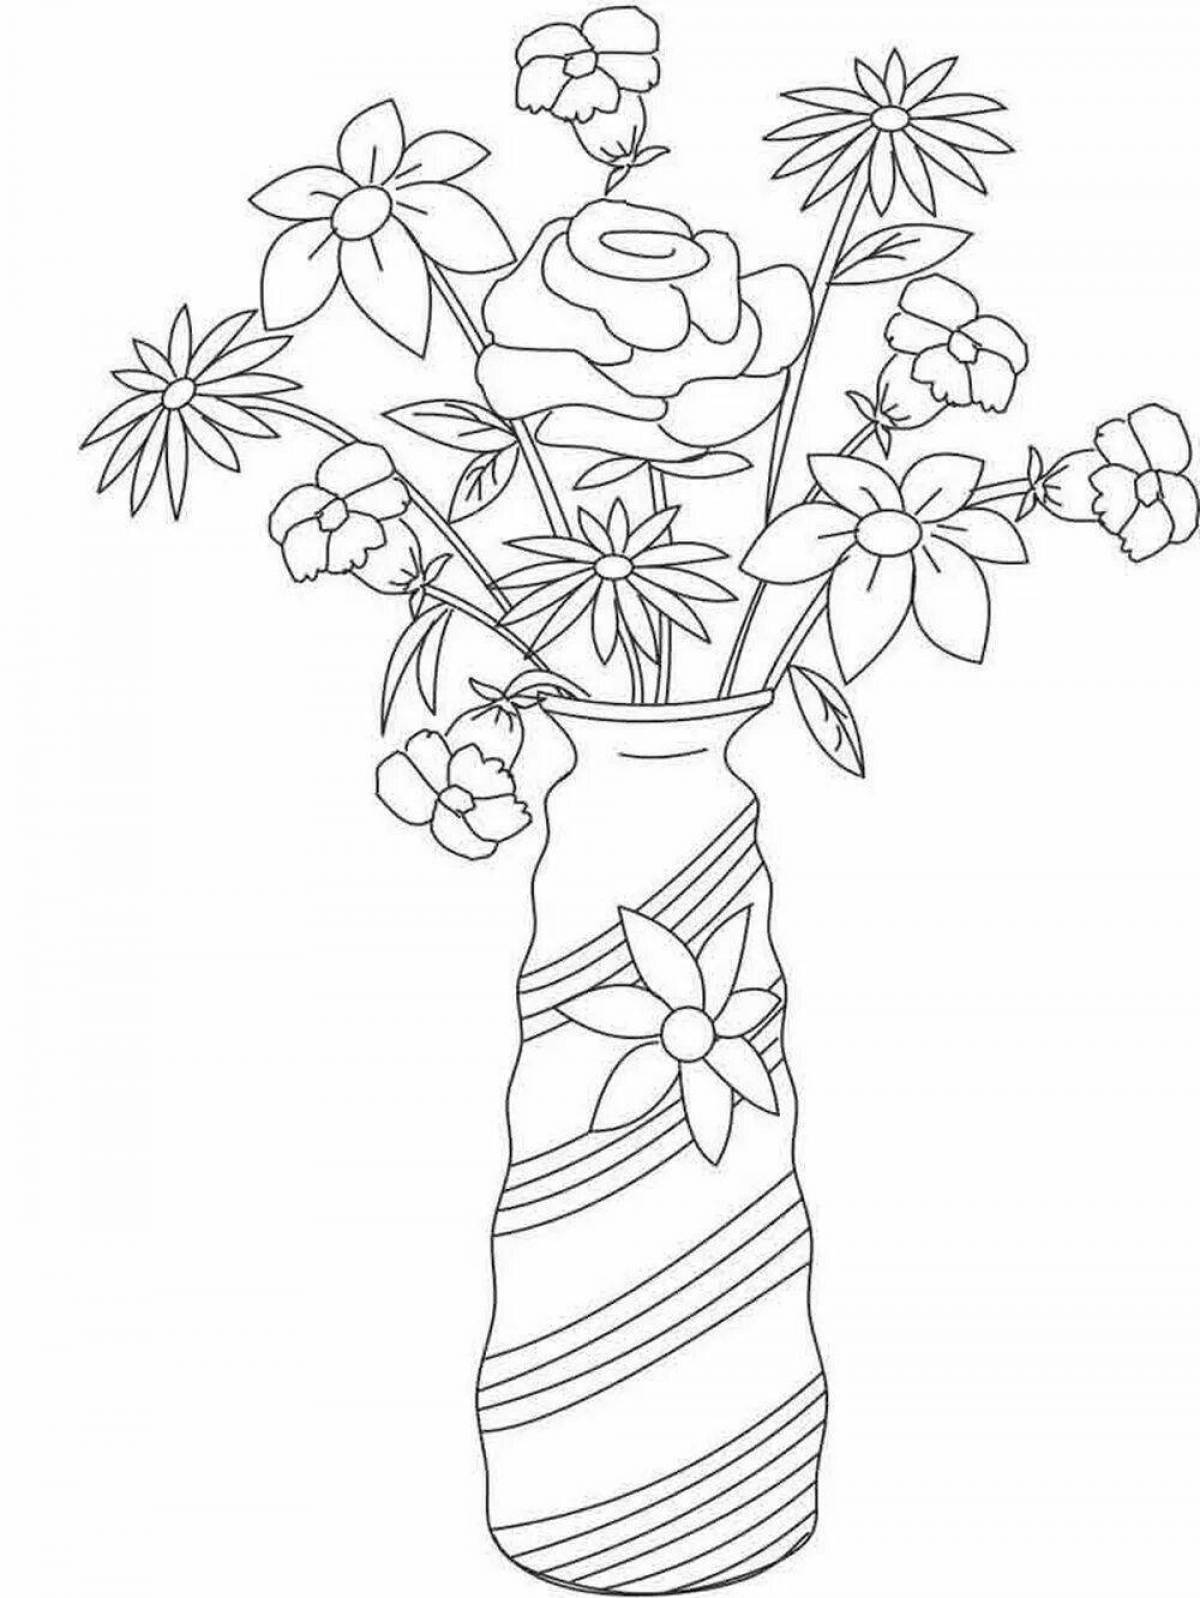 Coloring page royal bouquet in a vase